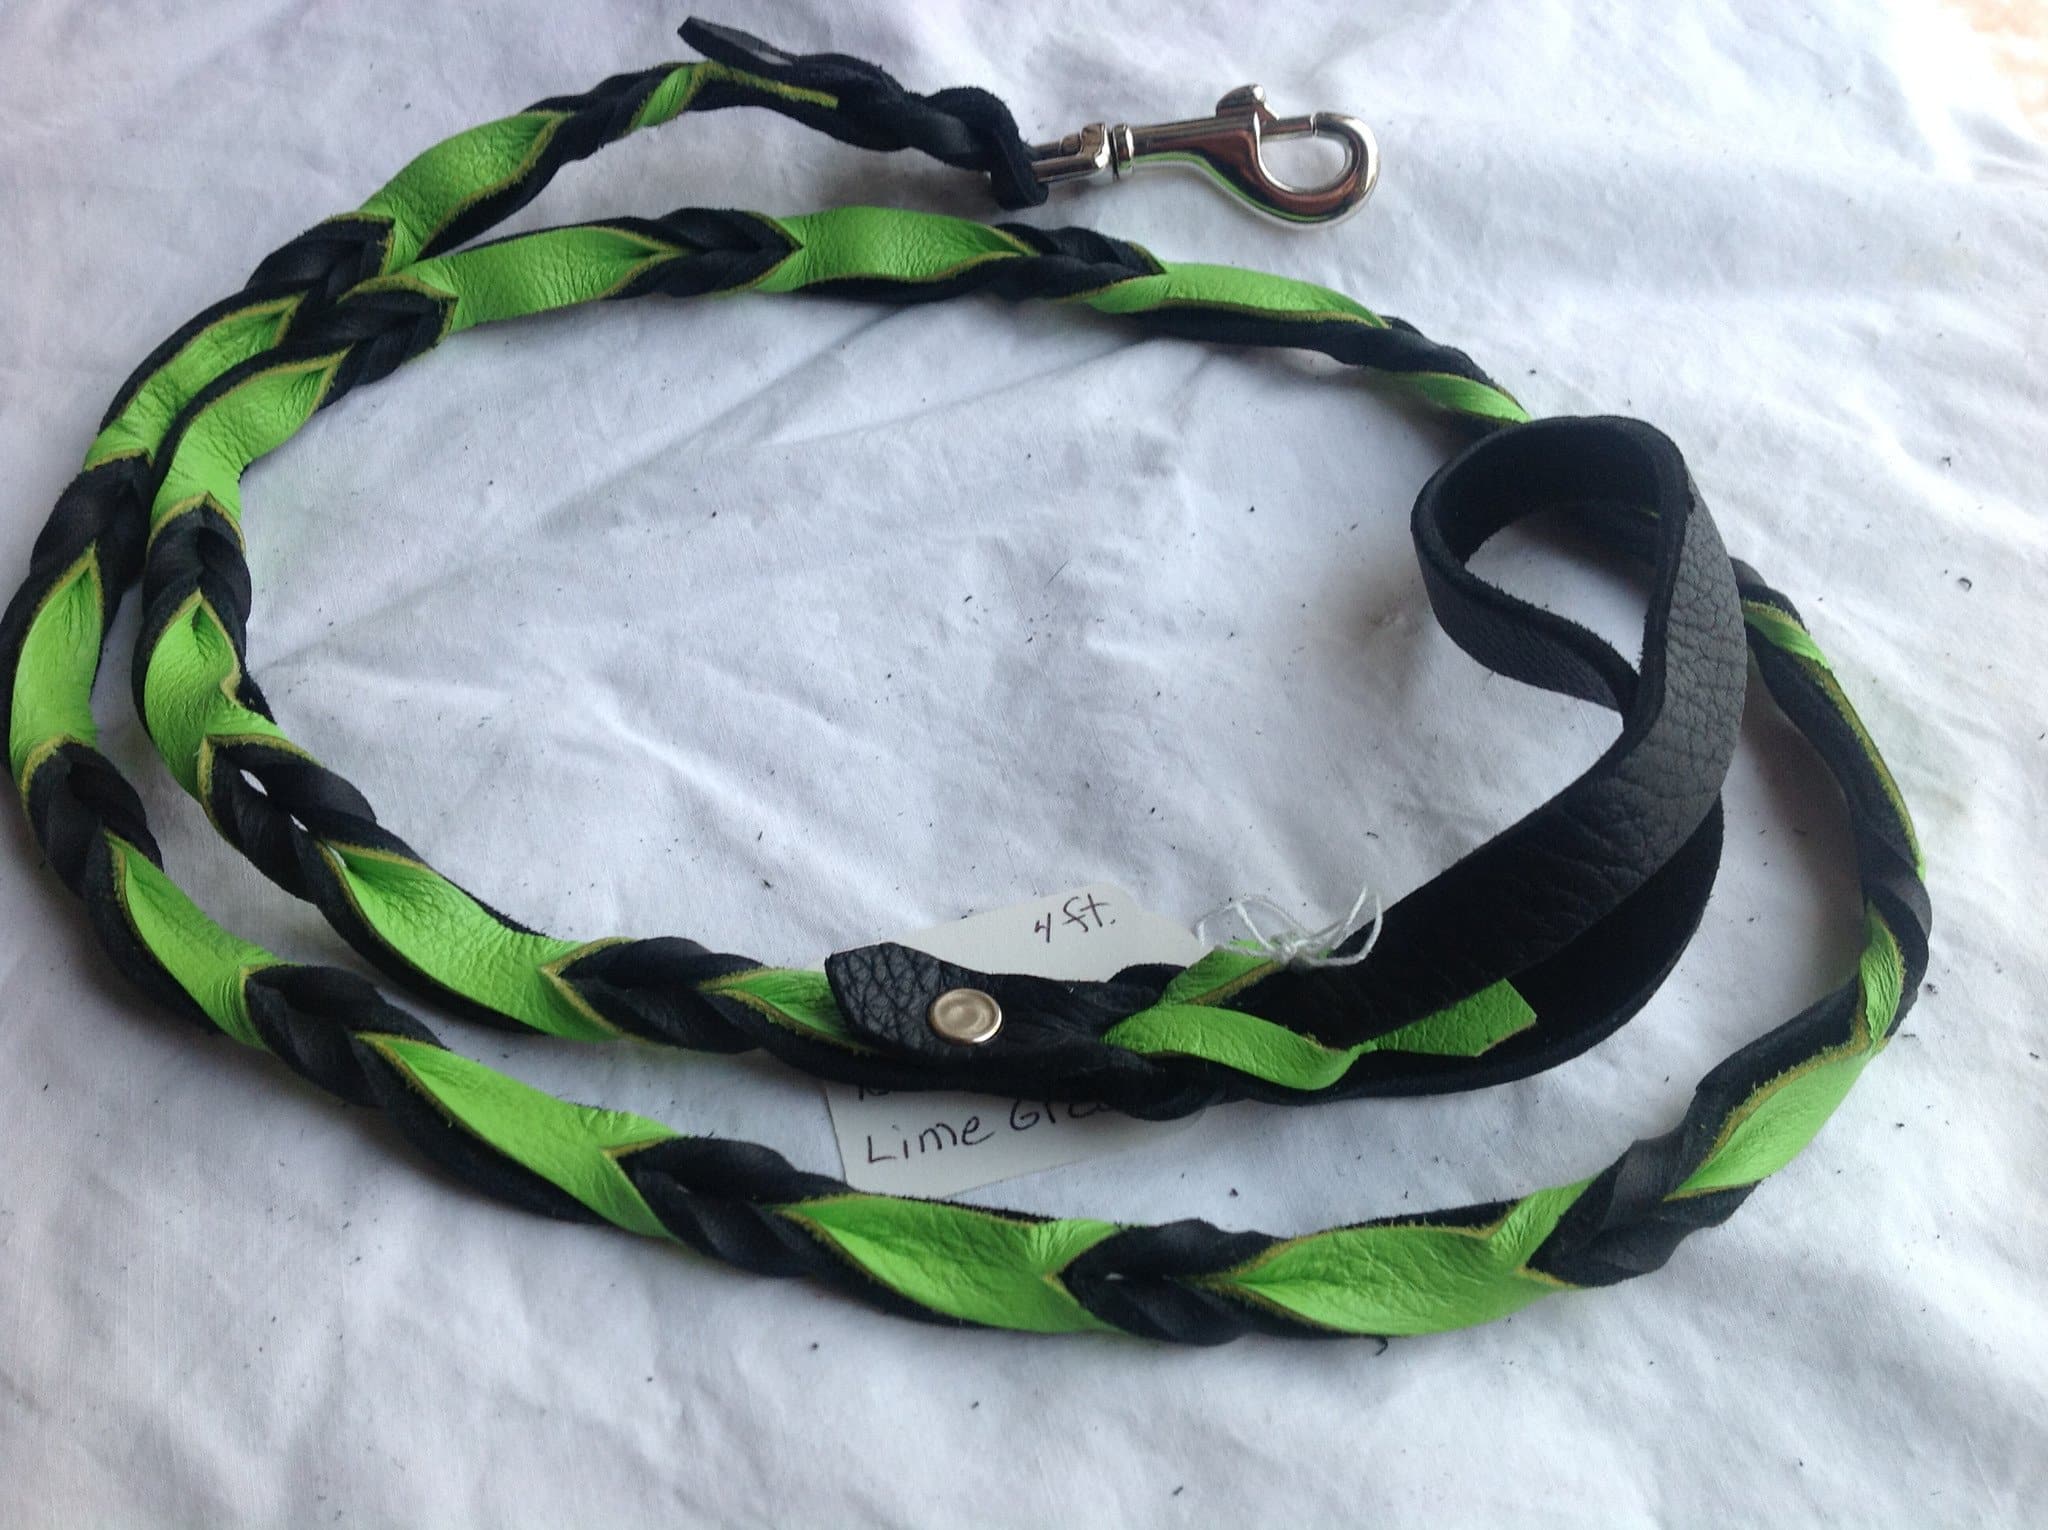 Wright Durable Green and Black Braided Leather Dog Leash 